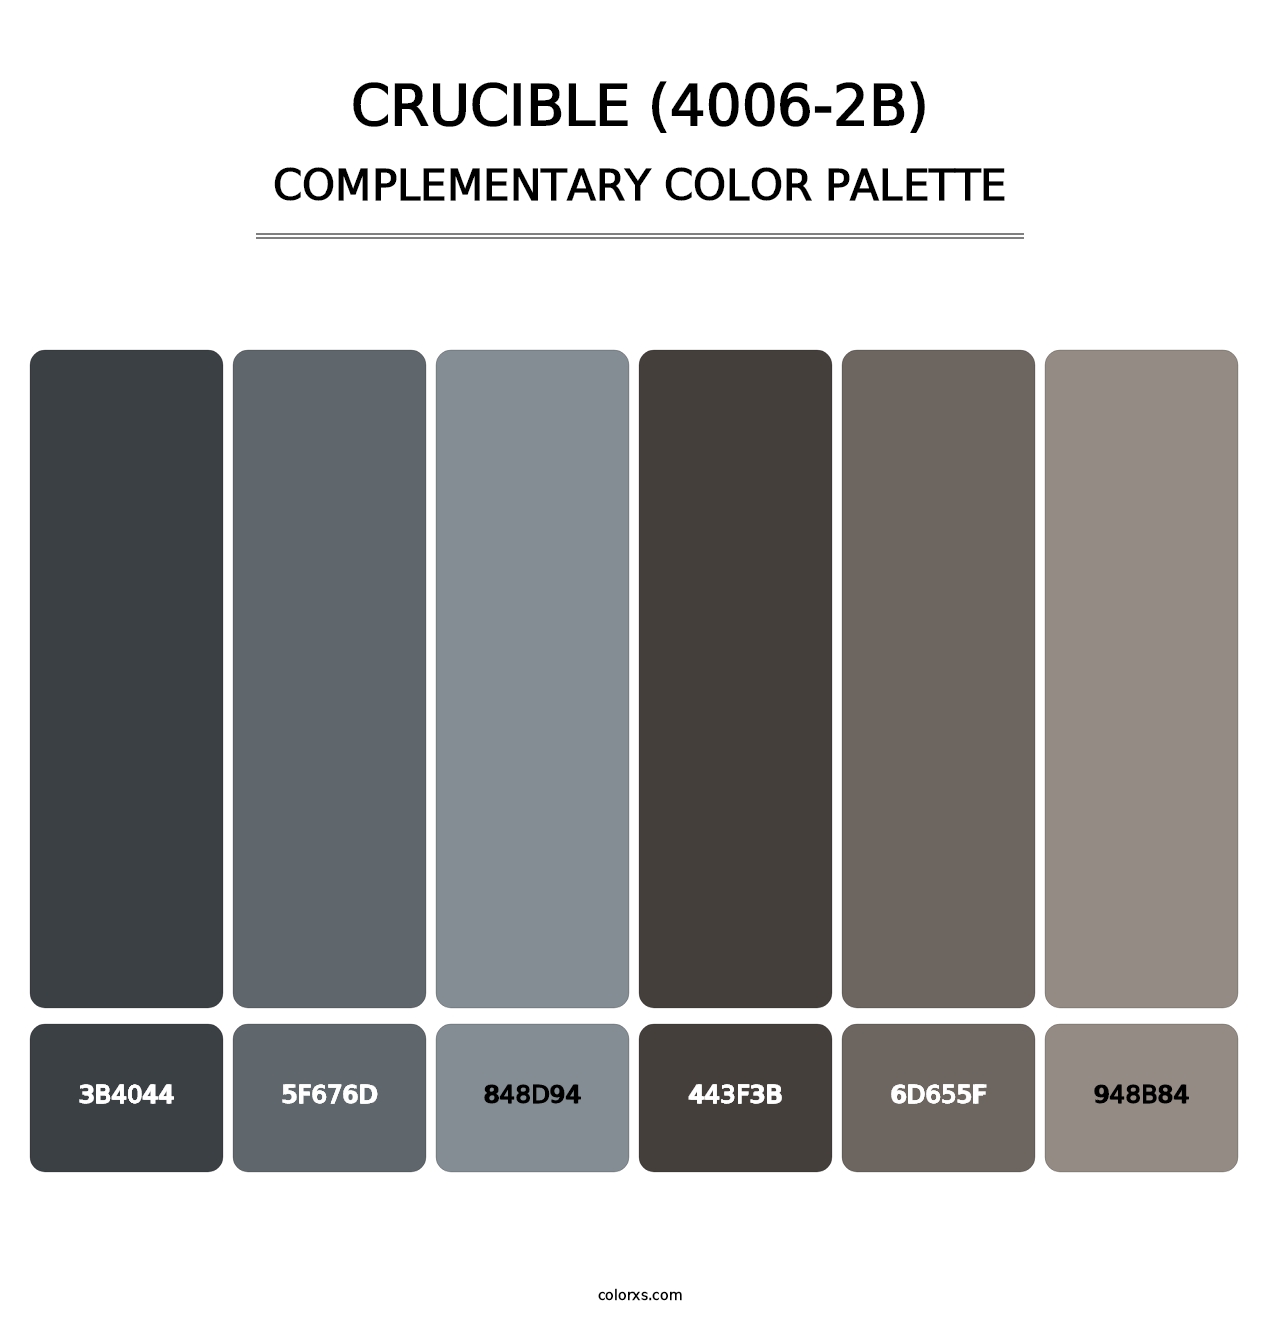 Crucible (4006-2B) - Complementary Color Palette